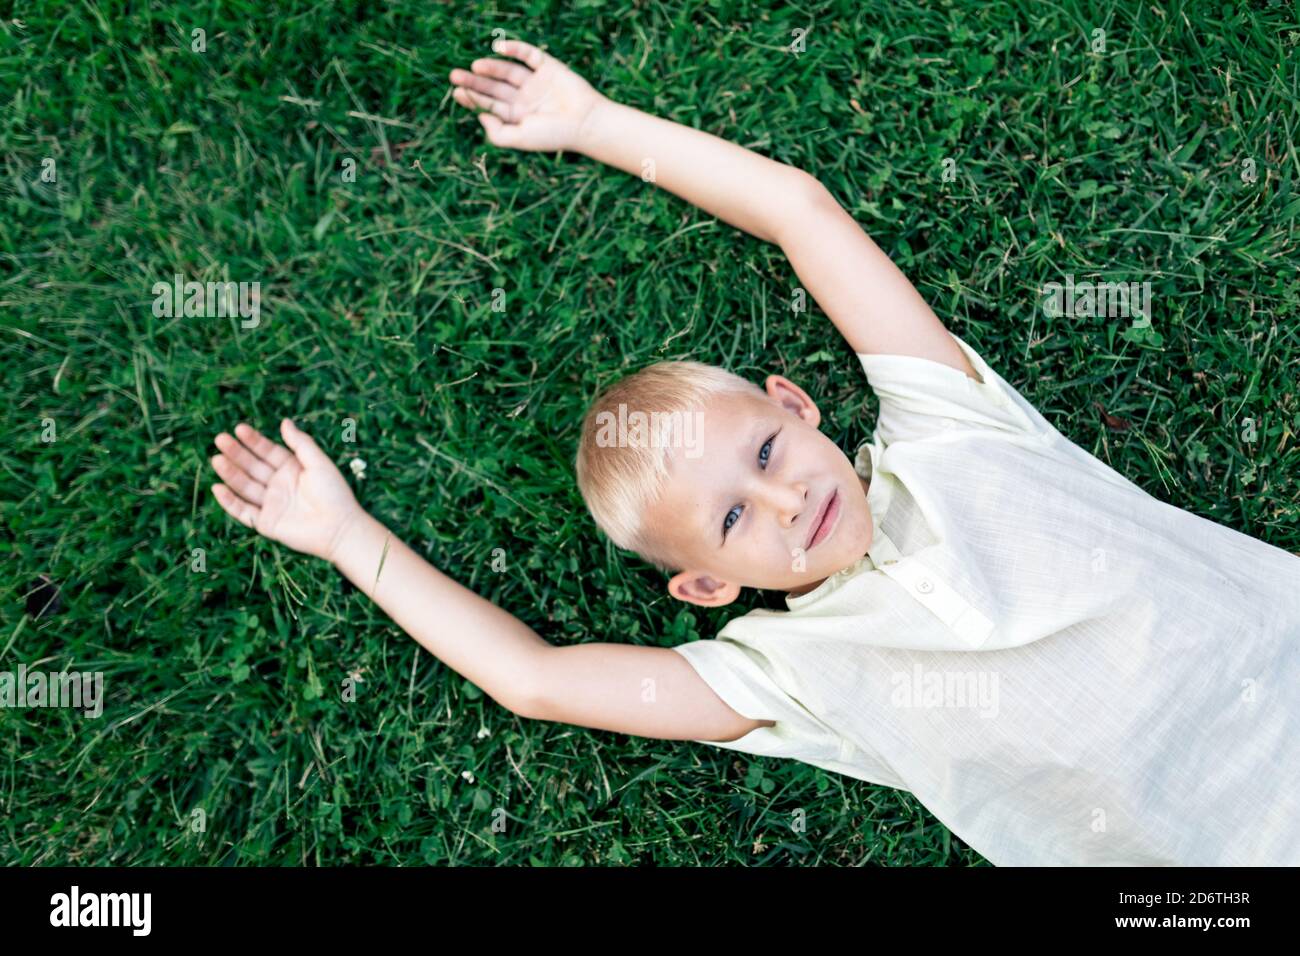 Overhead cheerful blond haired boy in white shirt looking at camera with smile while chilling on verdant grass with arms behind head Stock Photo